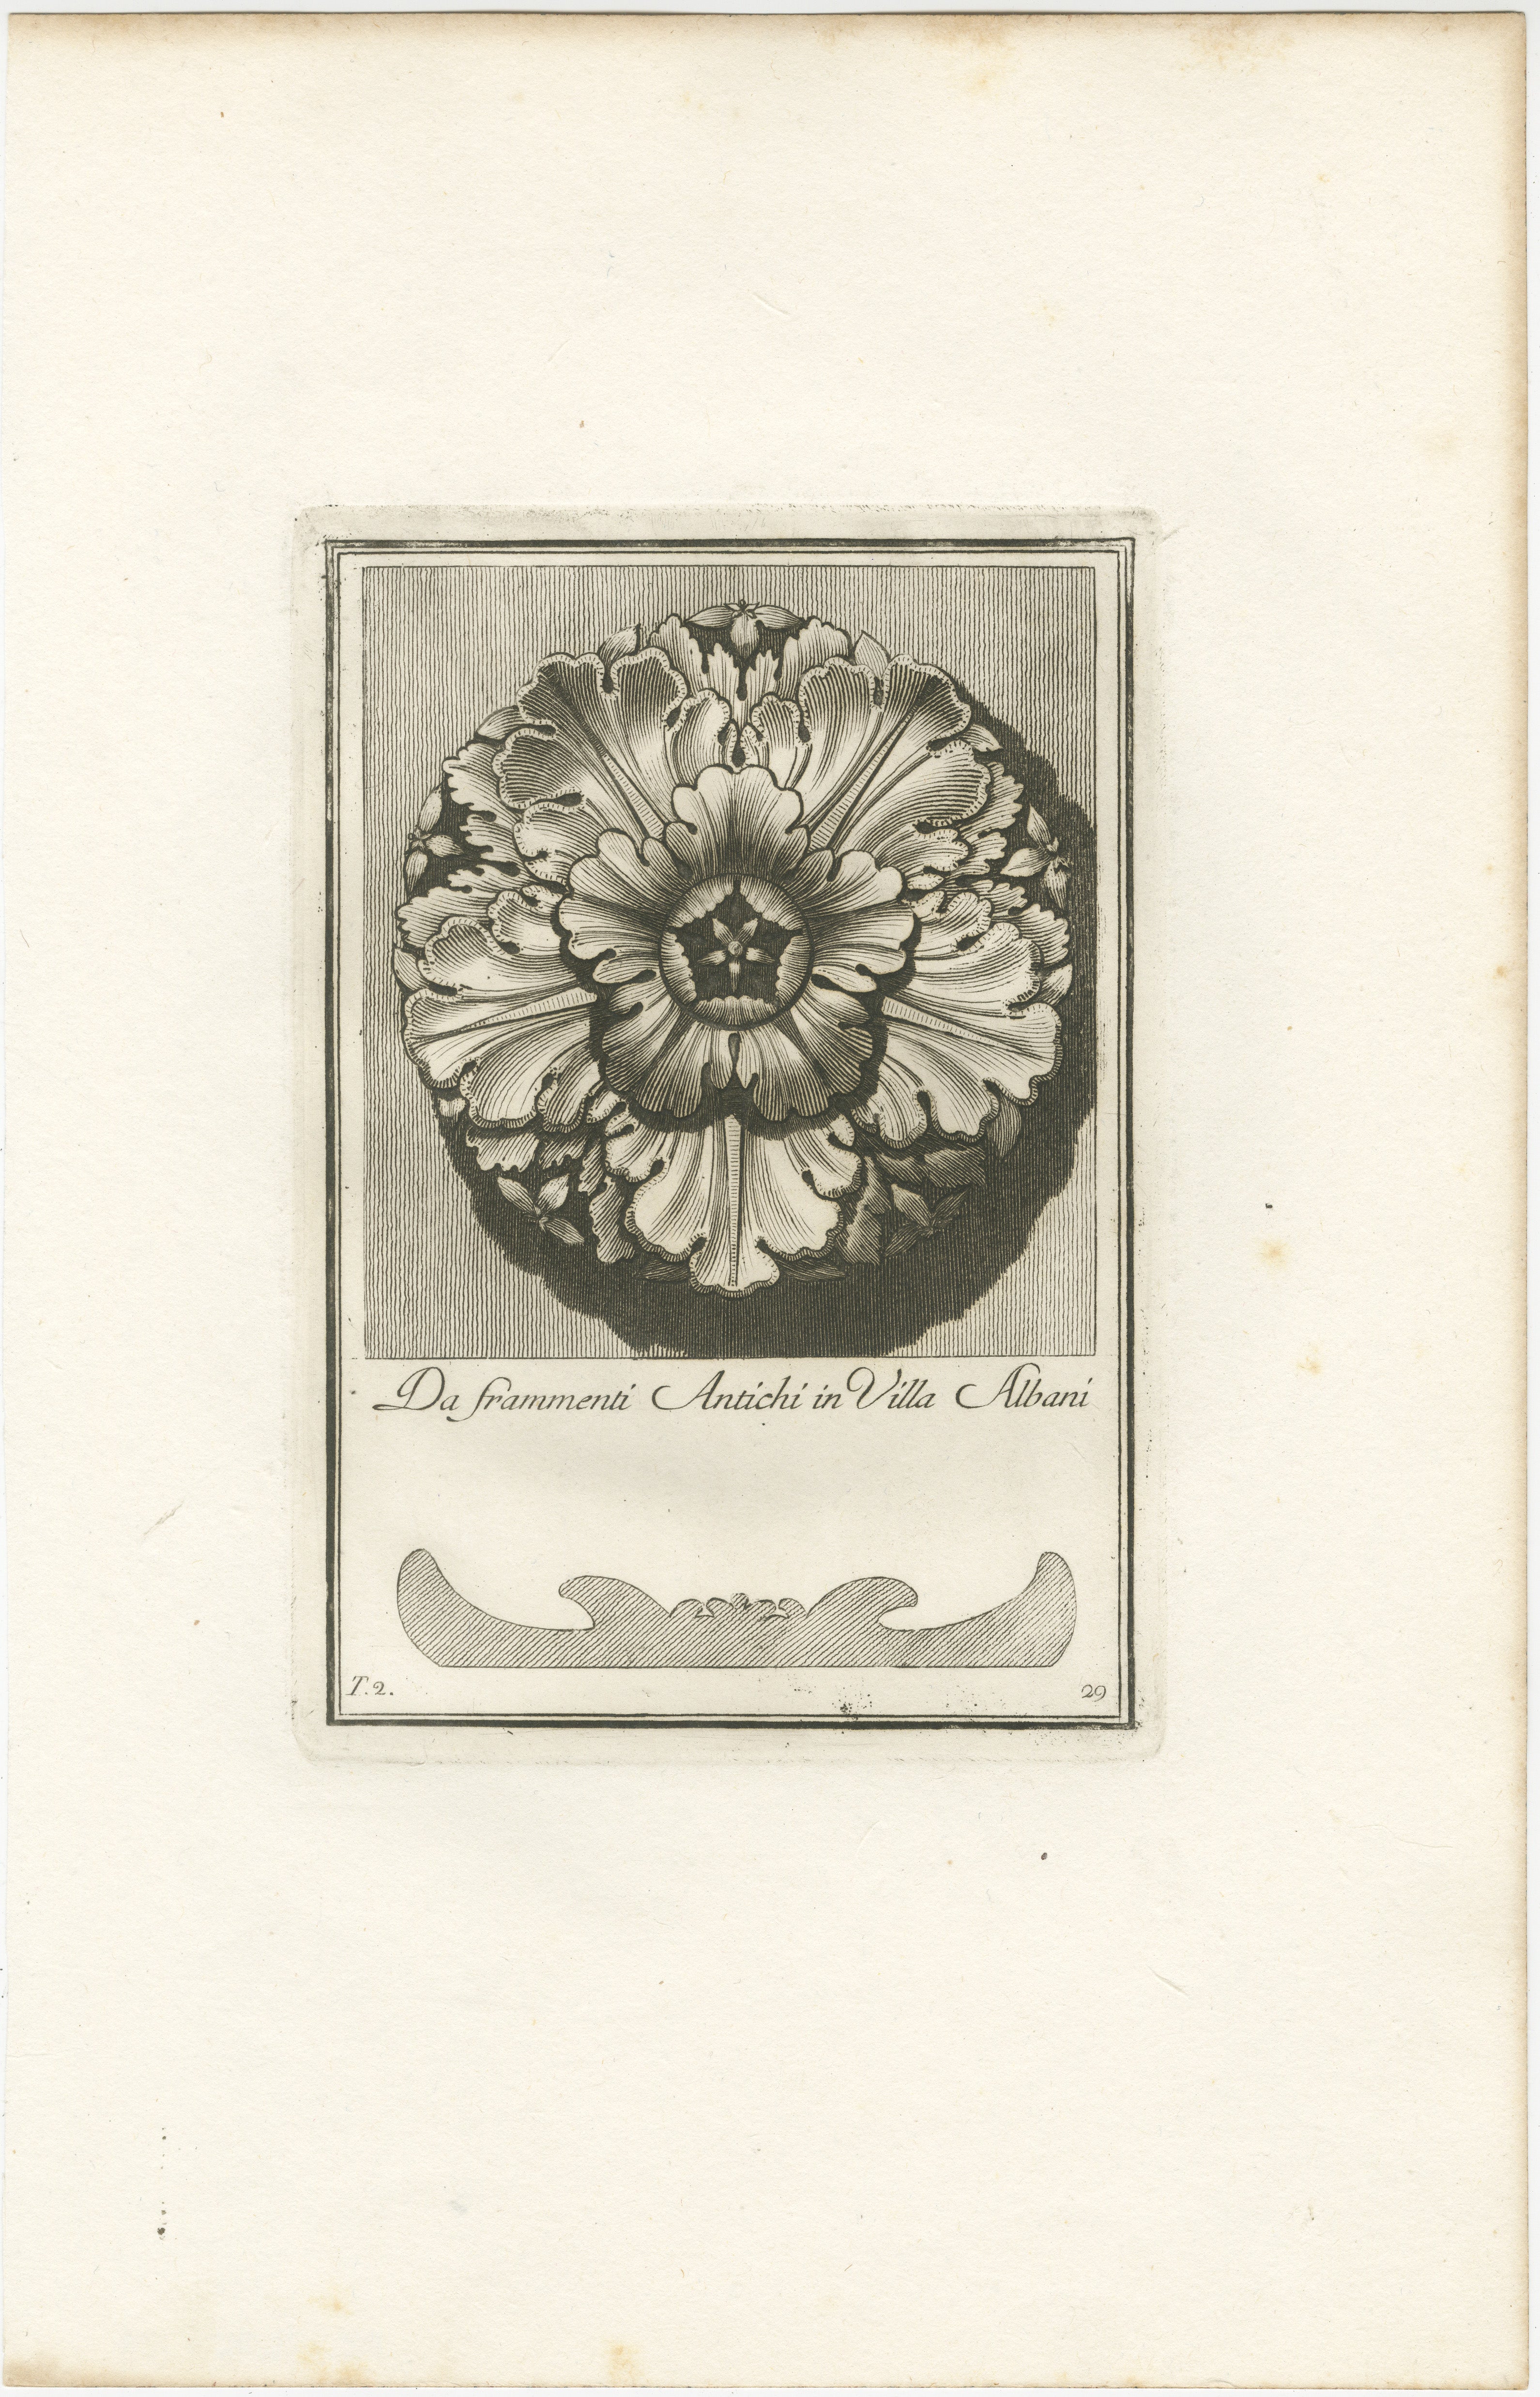 This exquisite engraving, dating back to around 1780, presents a masterfully crafted rosette, a decorative motif that captures the elegance and refined aesthetic of the neoclassical period. The piece, titled 